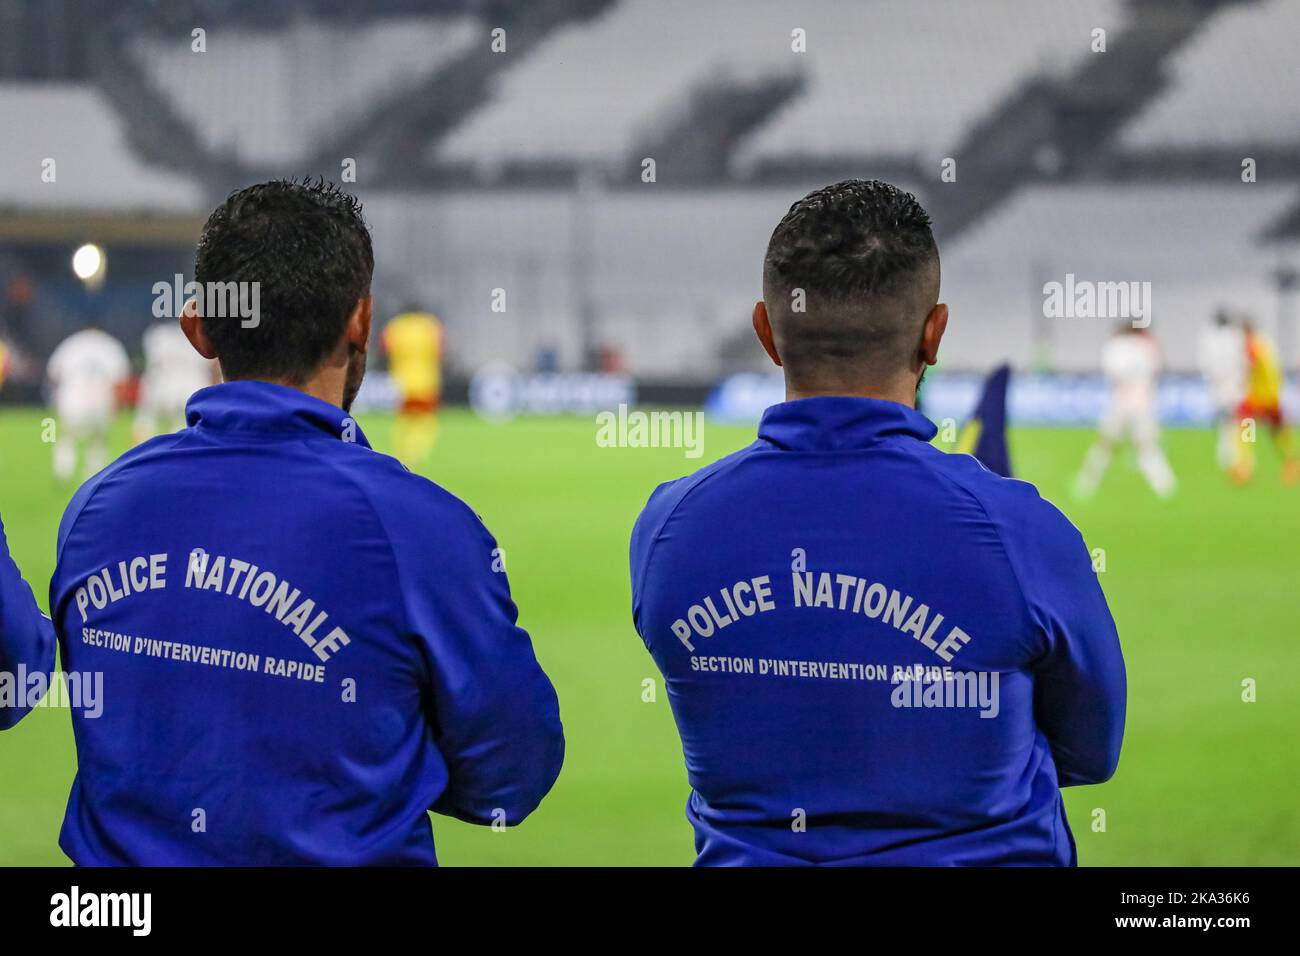 National french police officers during the french Ligue 1 Uber Eats match between OLYMPIQUE DE MARSEILLE and RACING CLUB DE LENS at Orange Velodrome s Stock Photo